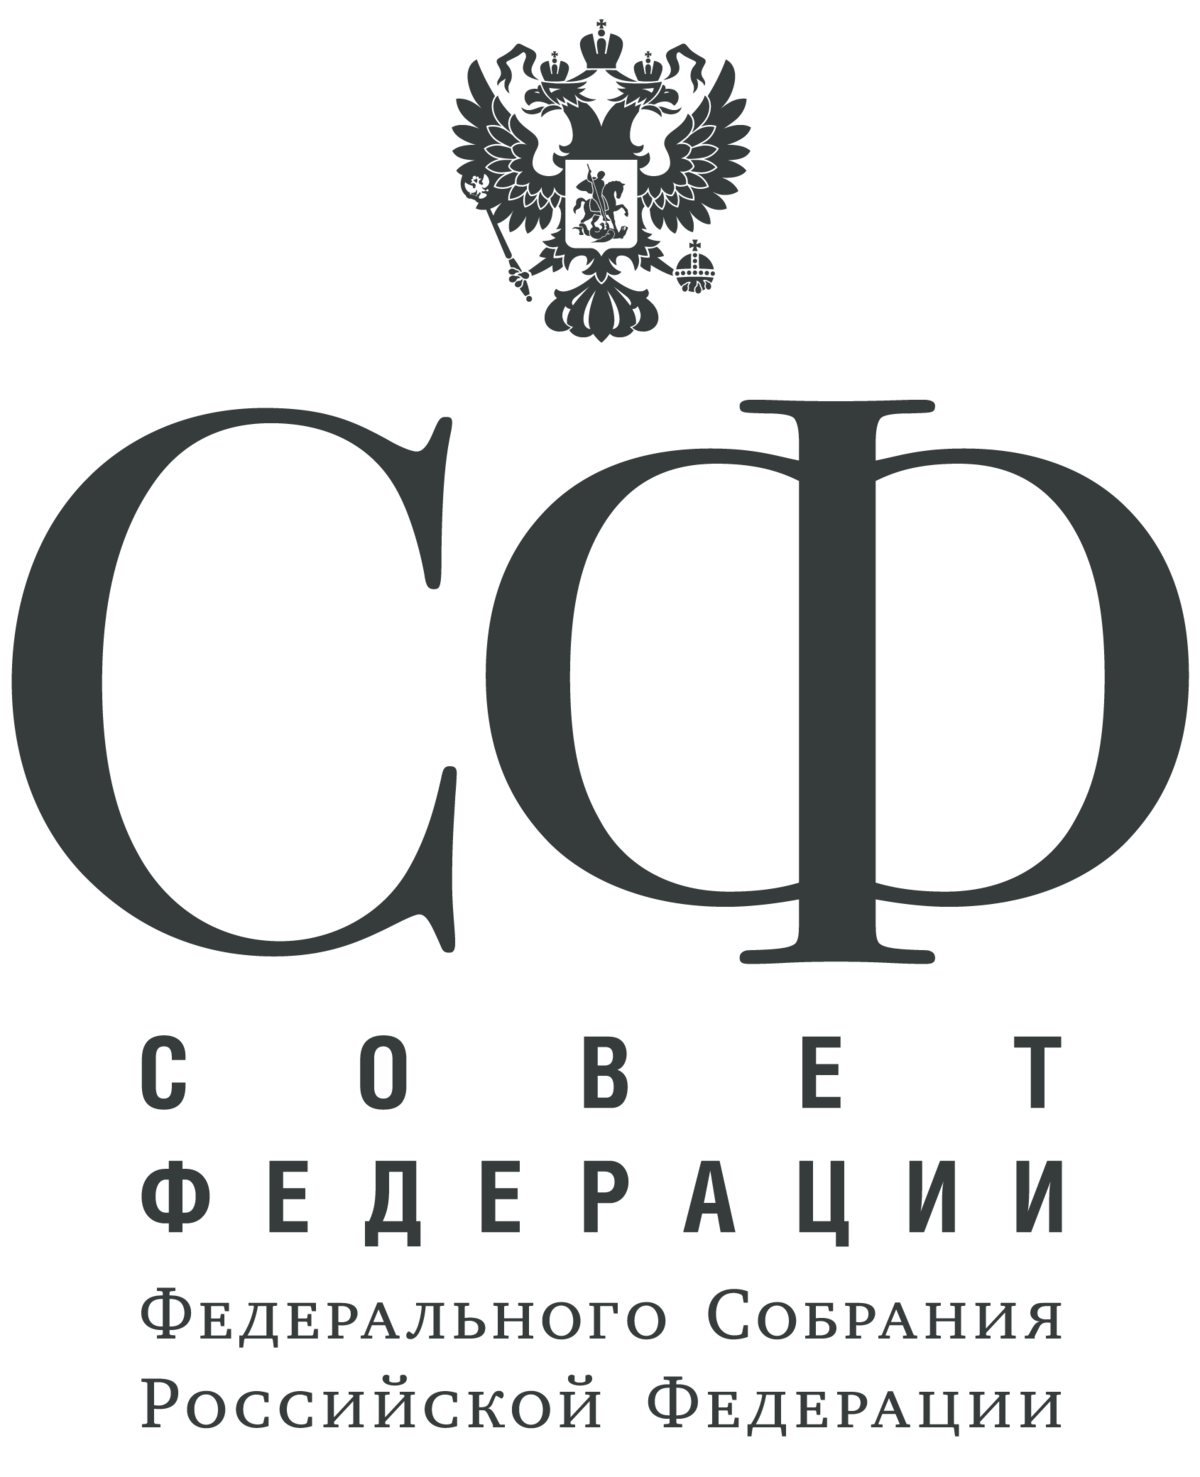 Emblem_of_the_Federation_Council_of_Russia.png